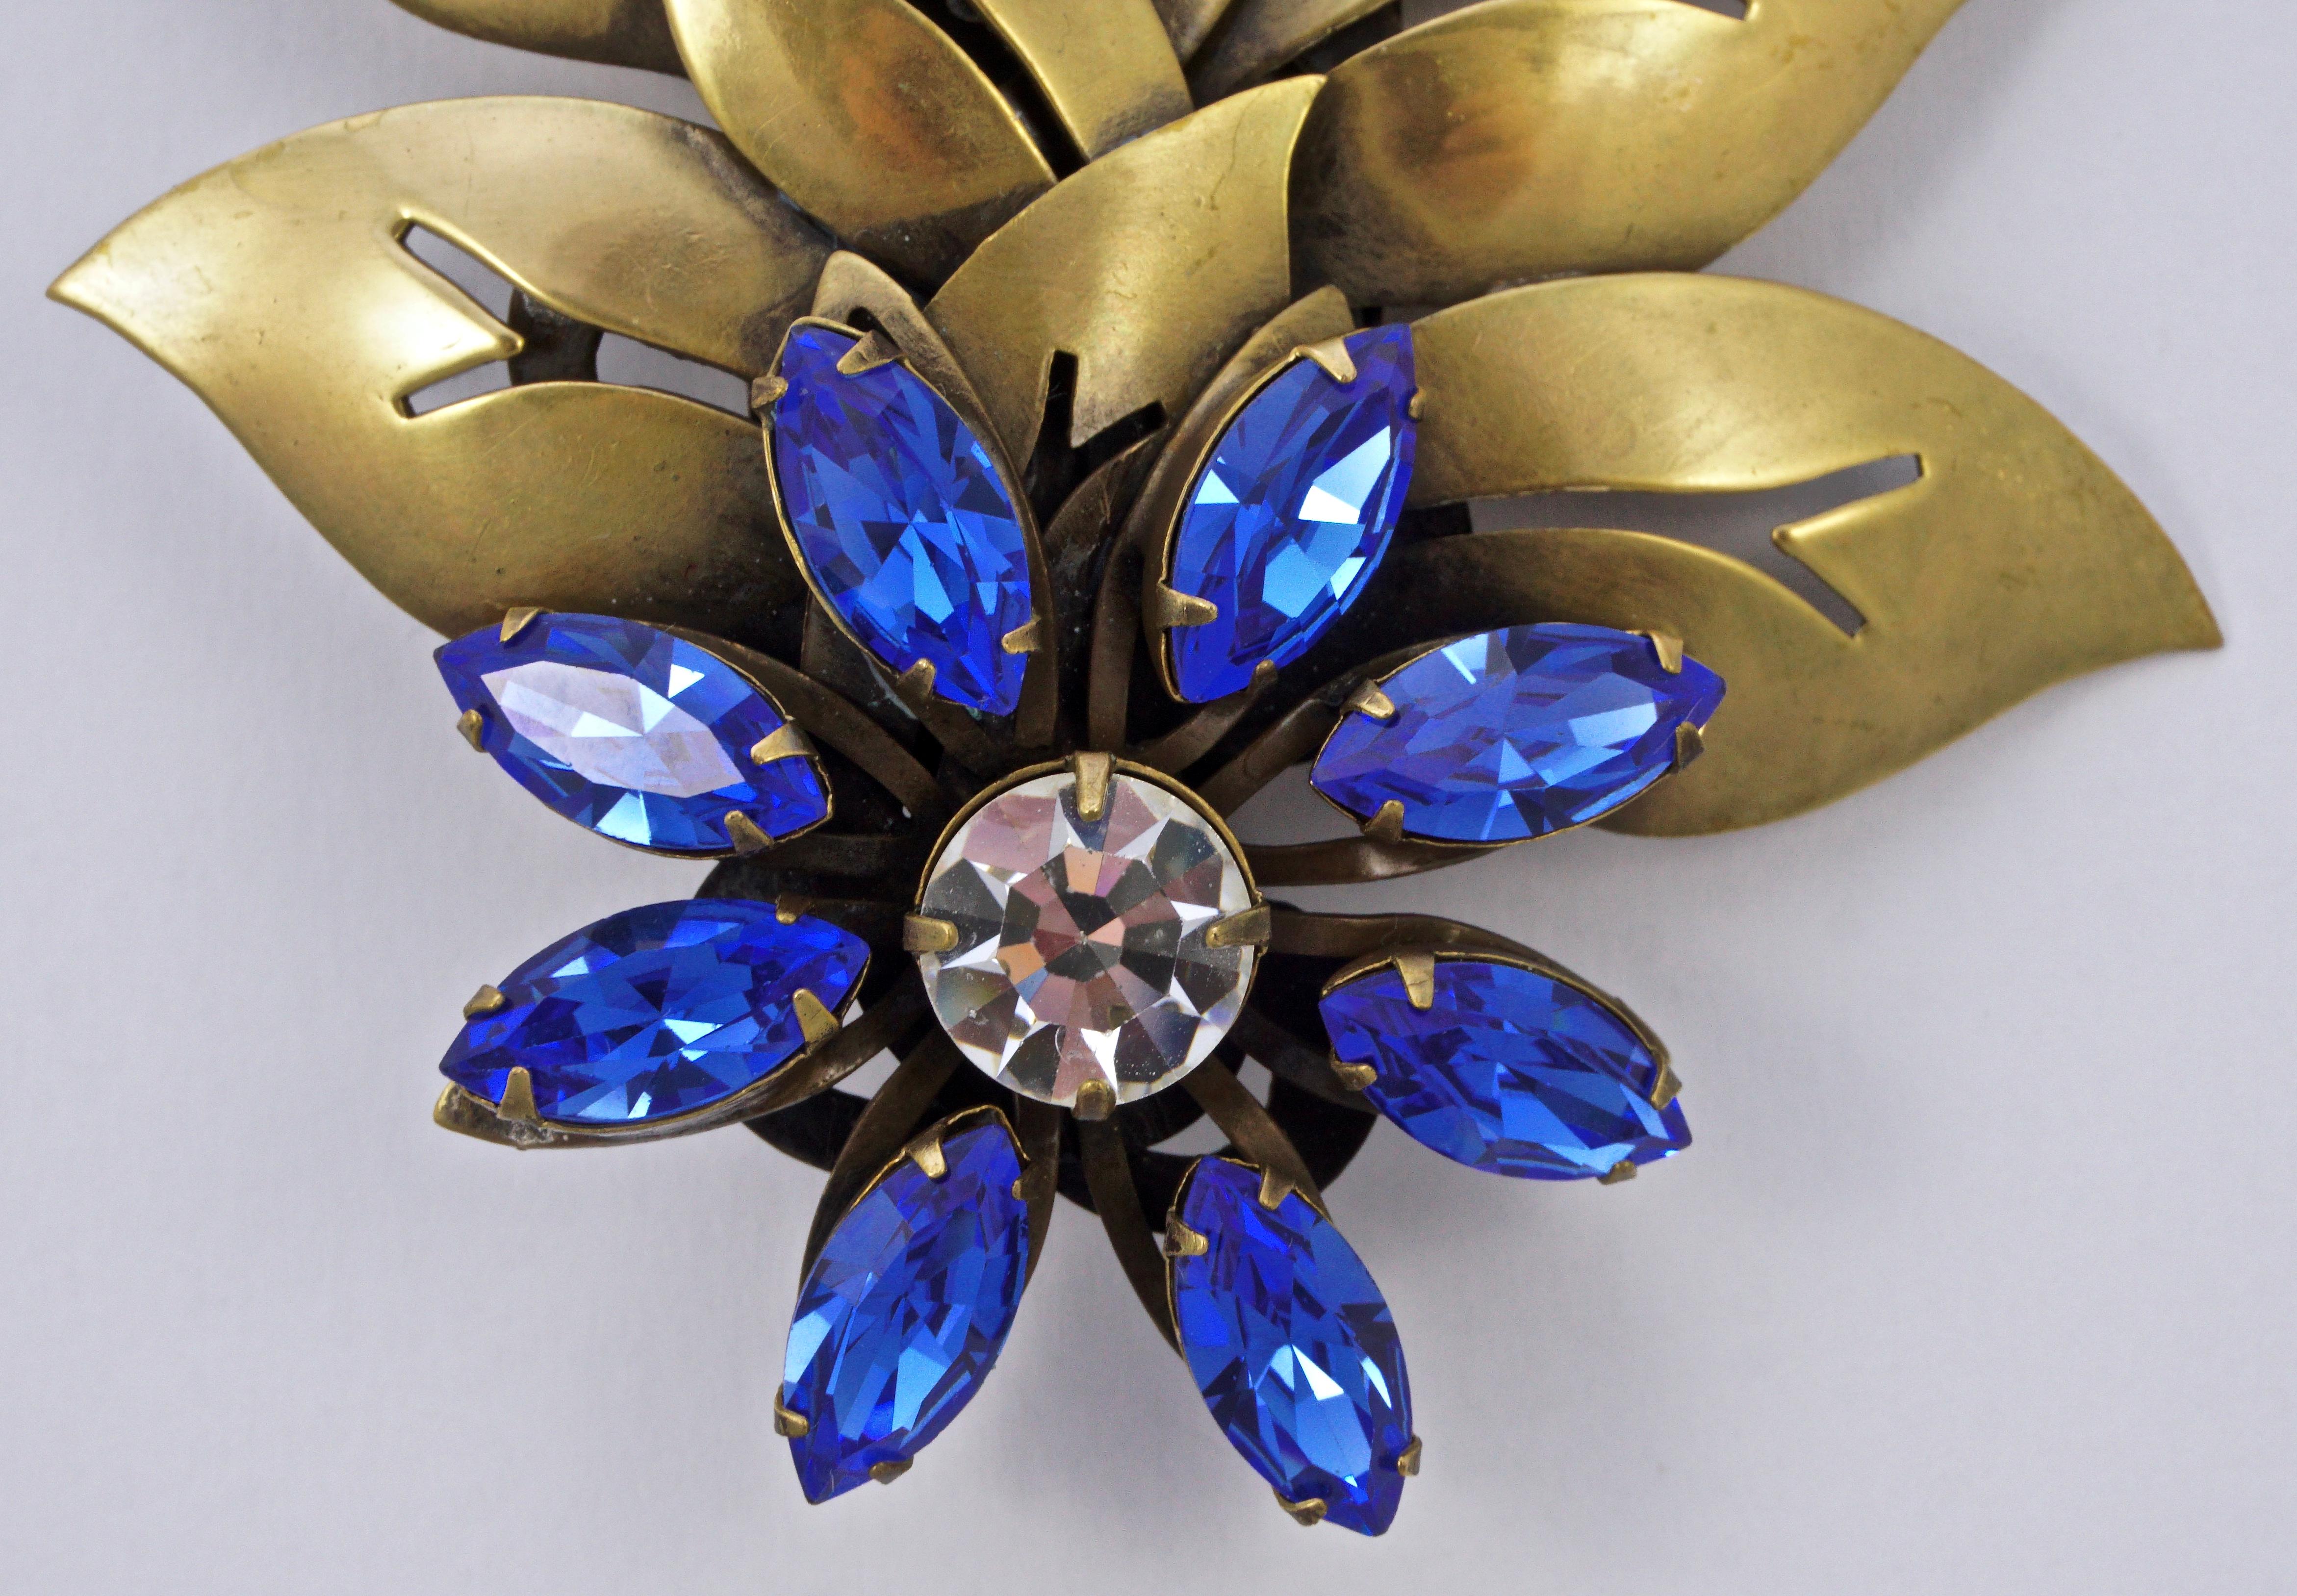 Joseff of Hollywood gold plated large flower and cut out leaves brooch, and clip-on earrings set. Featuring dazzling cobalt blue marquise and round clear crystals. The brooch measures 11cm / 4.3 inches by 7.6cm / 3 inches, and the earrings are